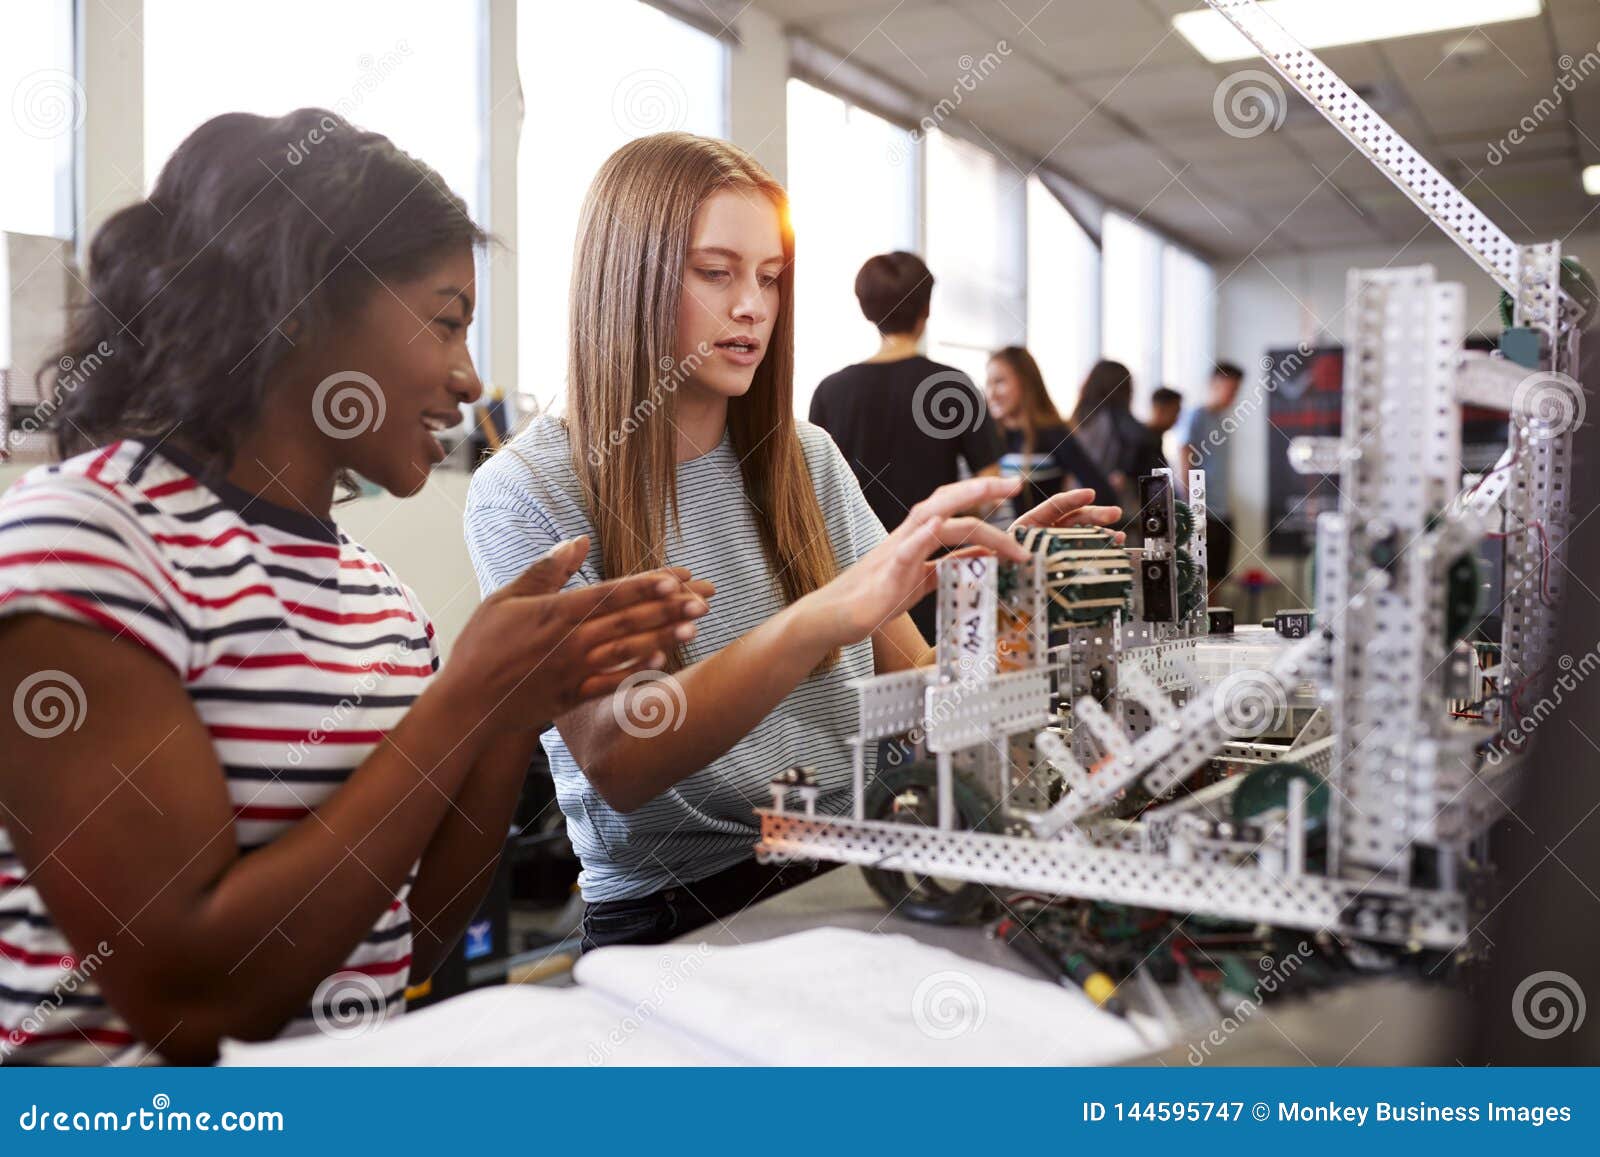 two female college students building machine in science robotics or engineering class